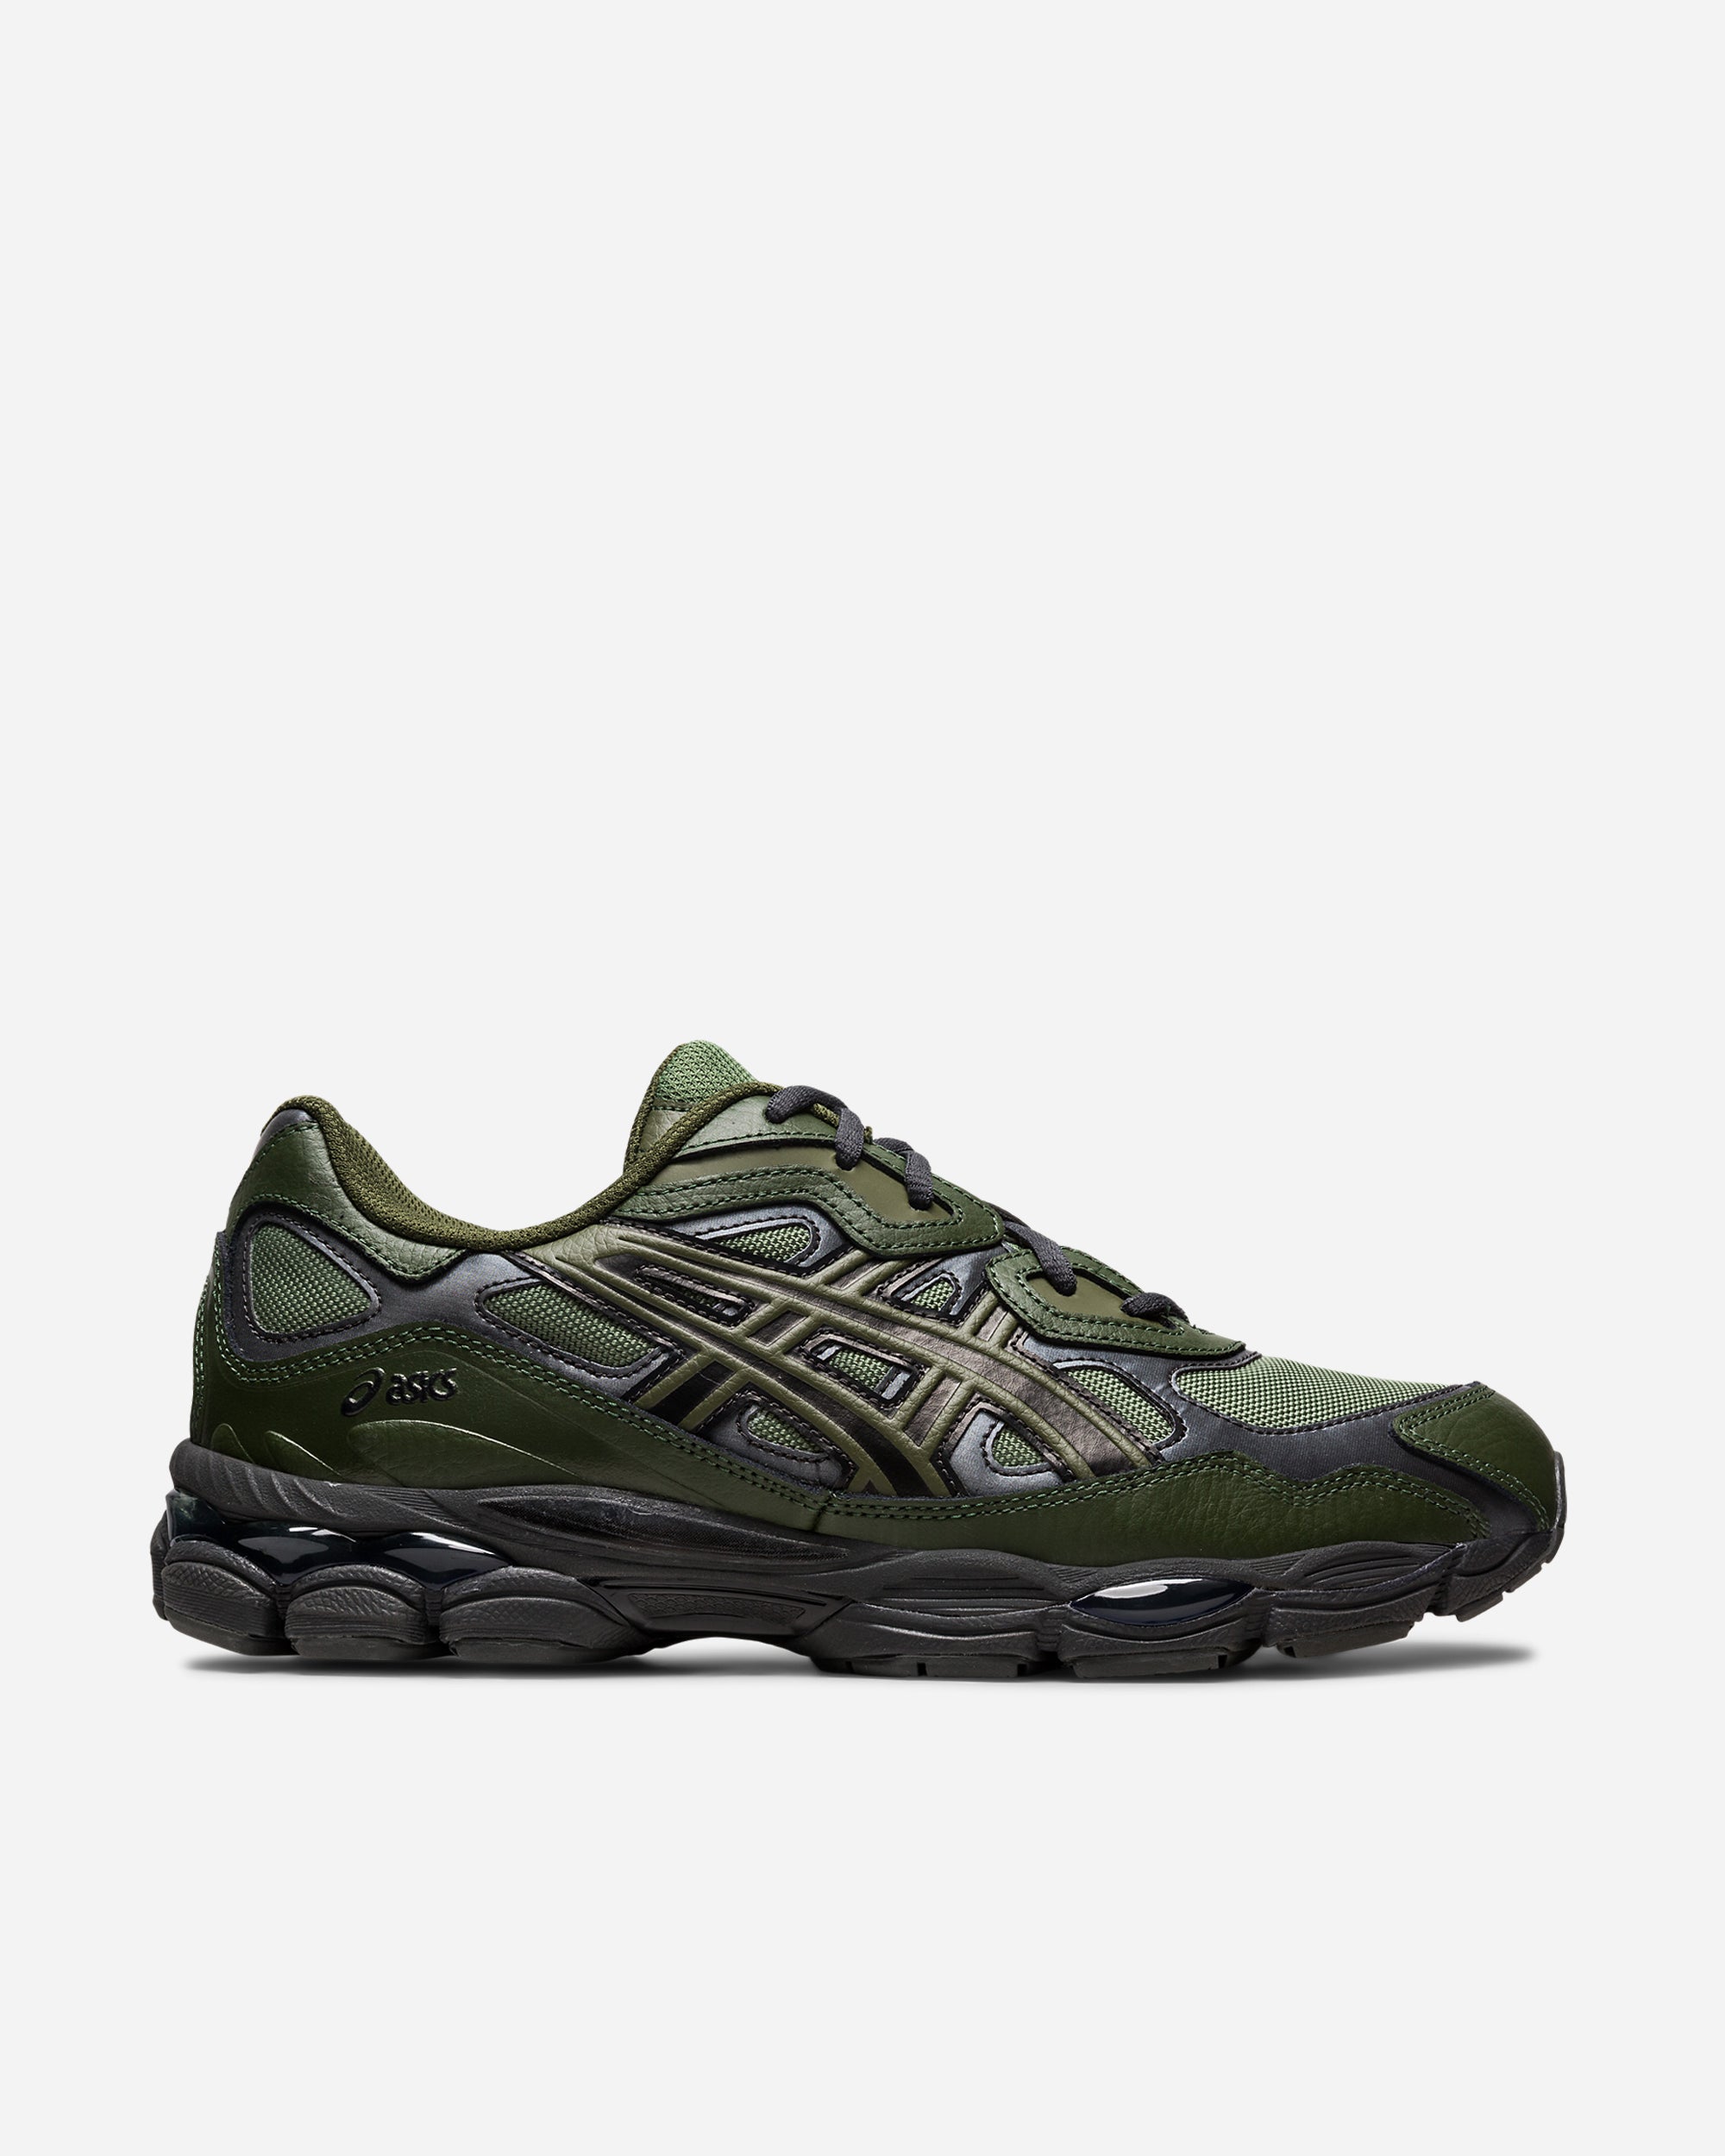 Asics GEL-NYC MOSS/FOREST 1203A280-300